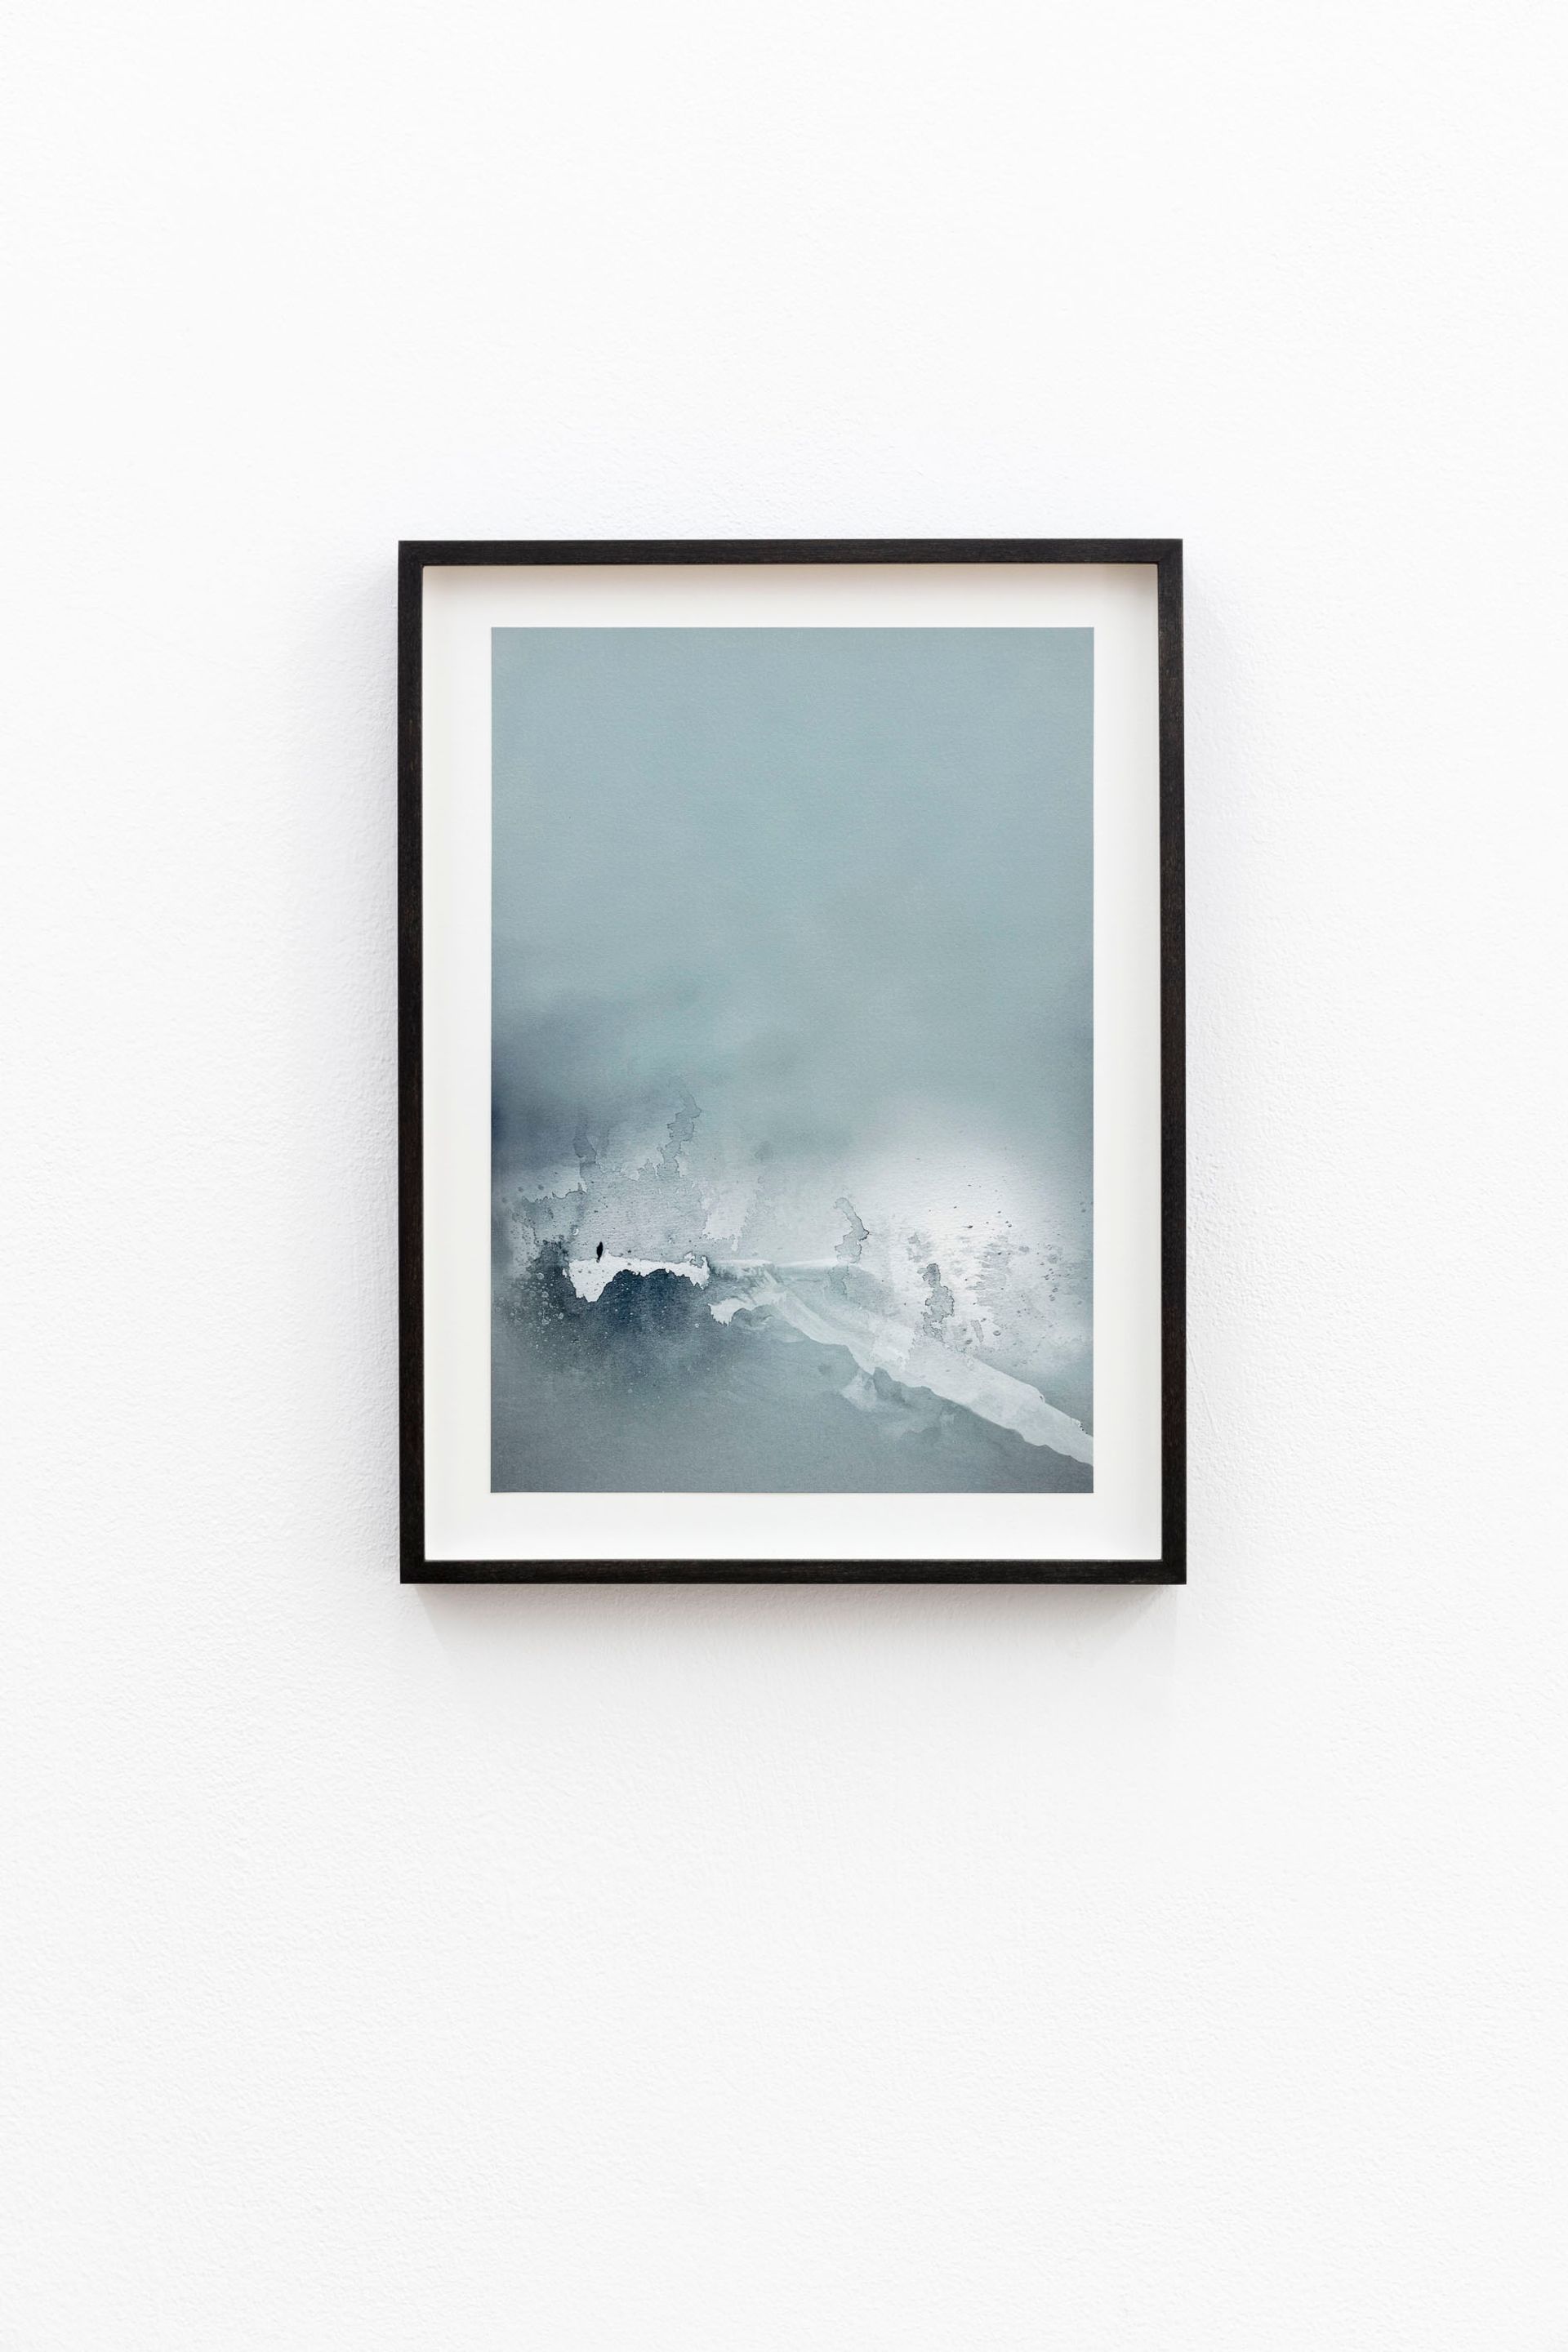 inutuuluni / allein, 2023, pigment print on watercolor paper, 28,5 × 20 cm, frame: 34 × 25,5 × 2,9 cm